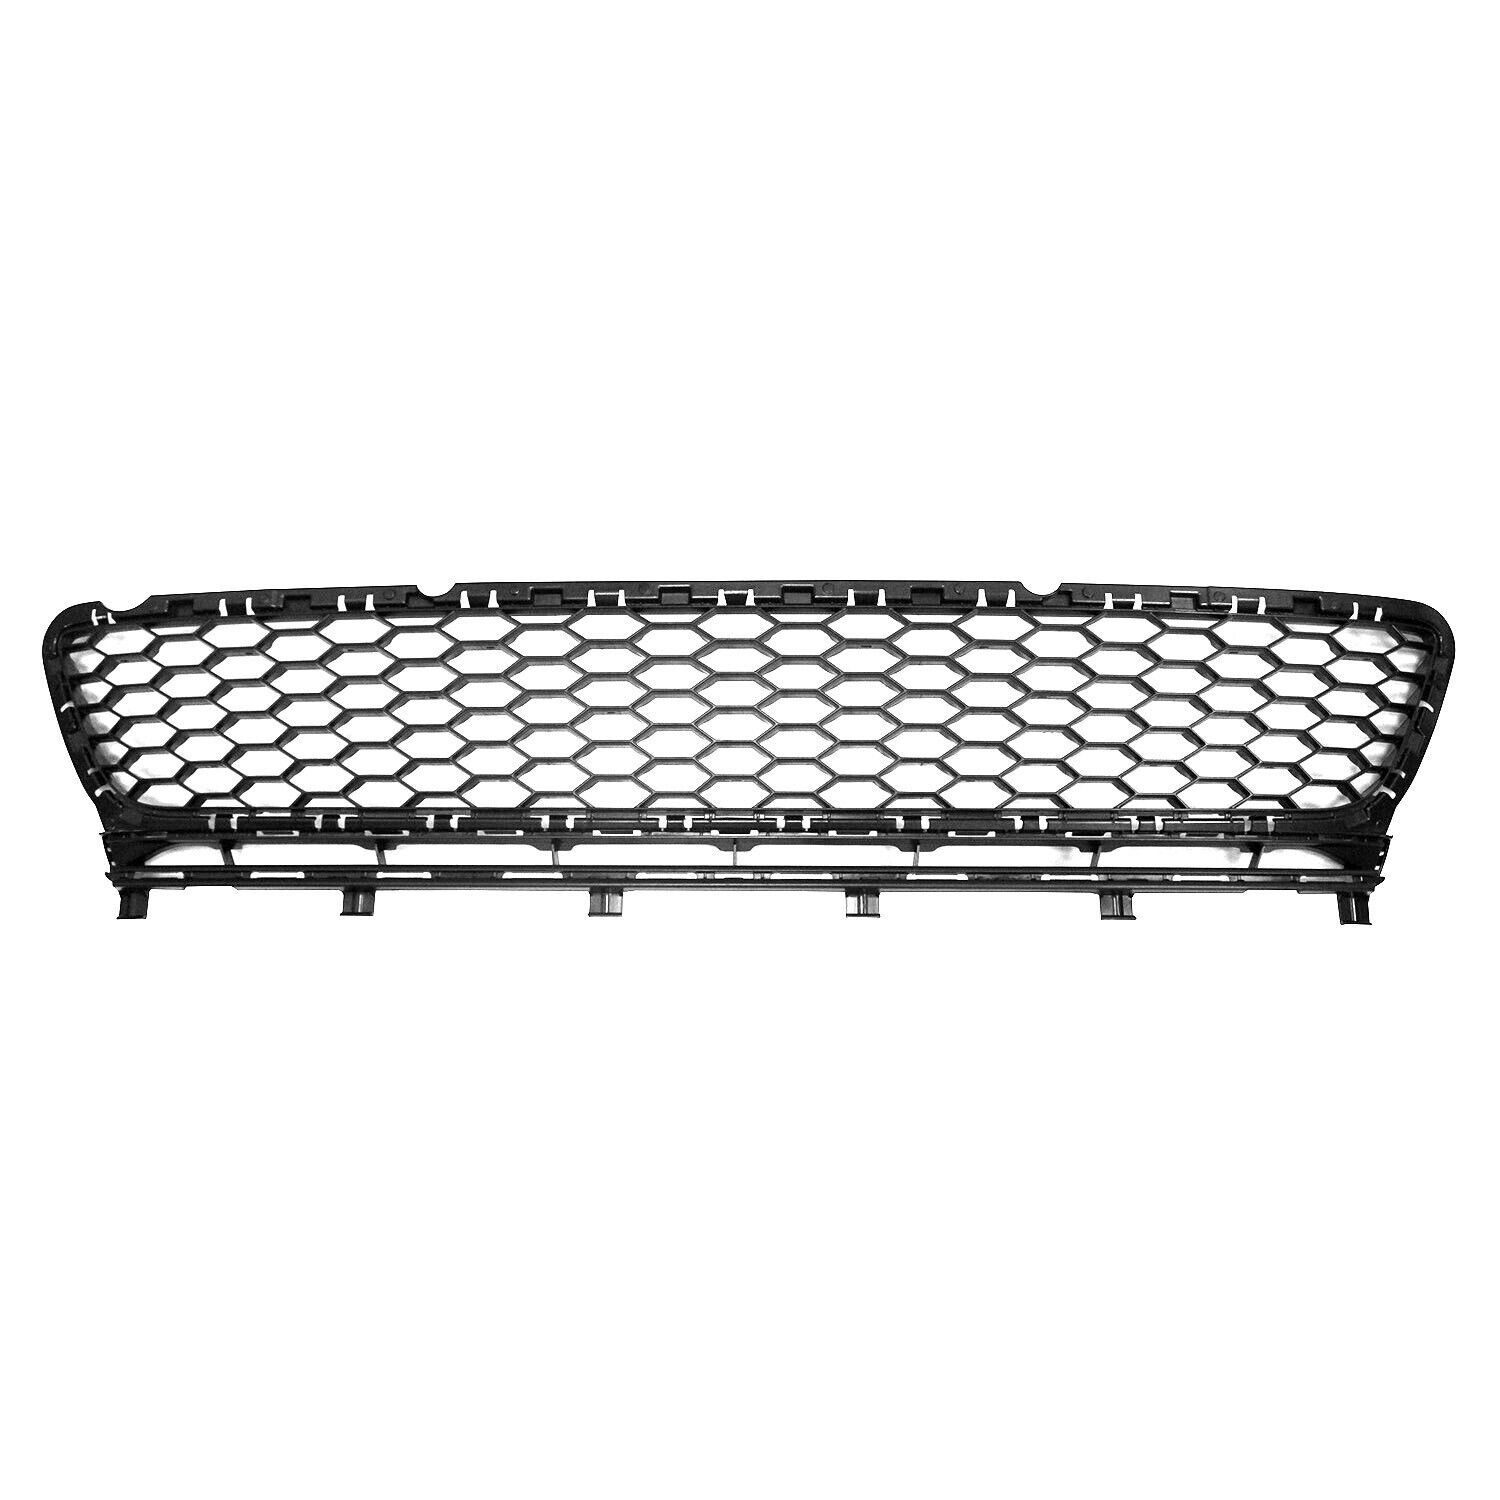 VW1036134 New Bumper Cover Grille Fits 2015-2017 Volkswagen GTI